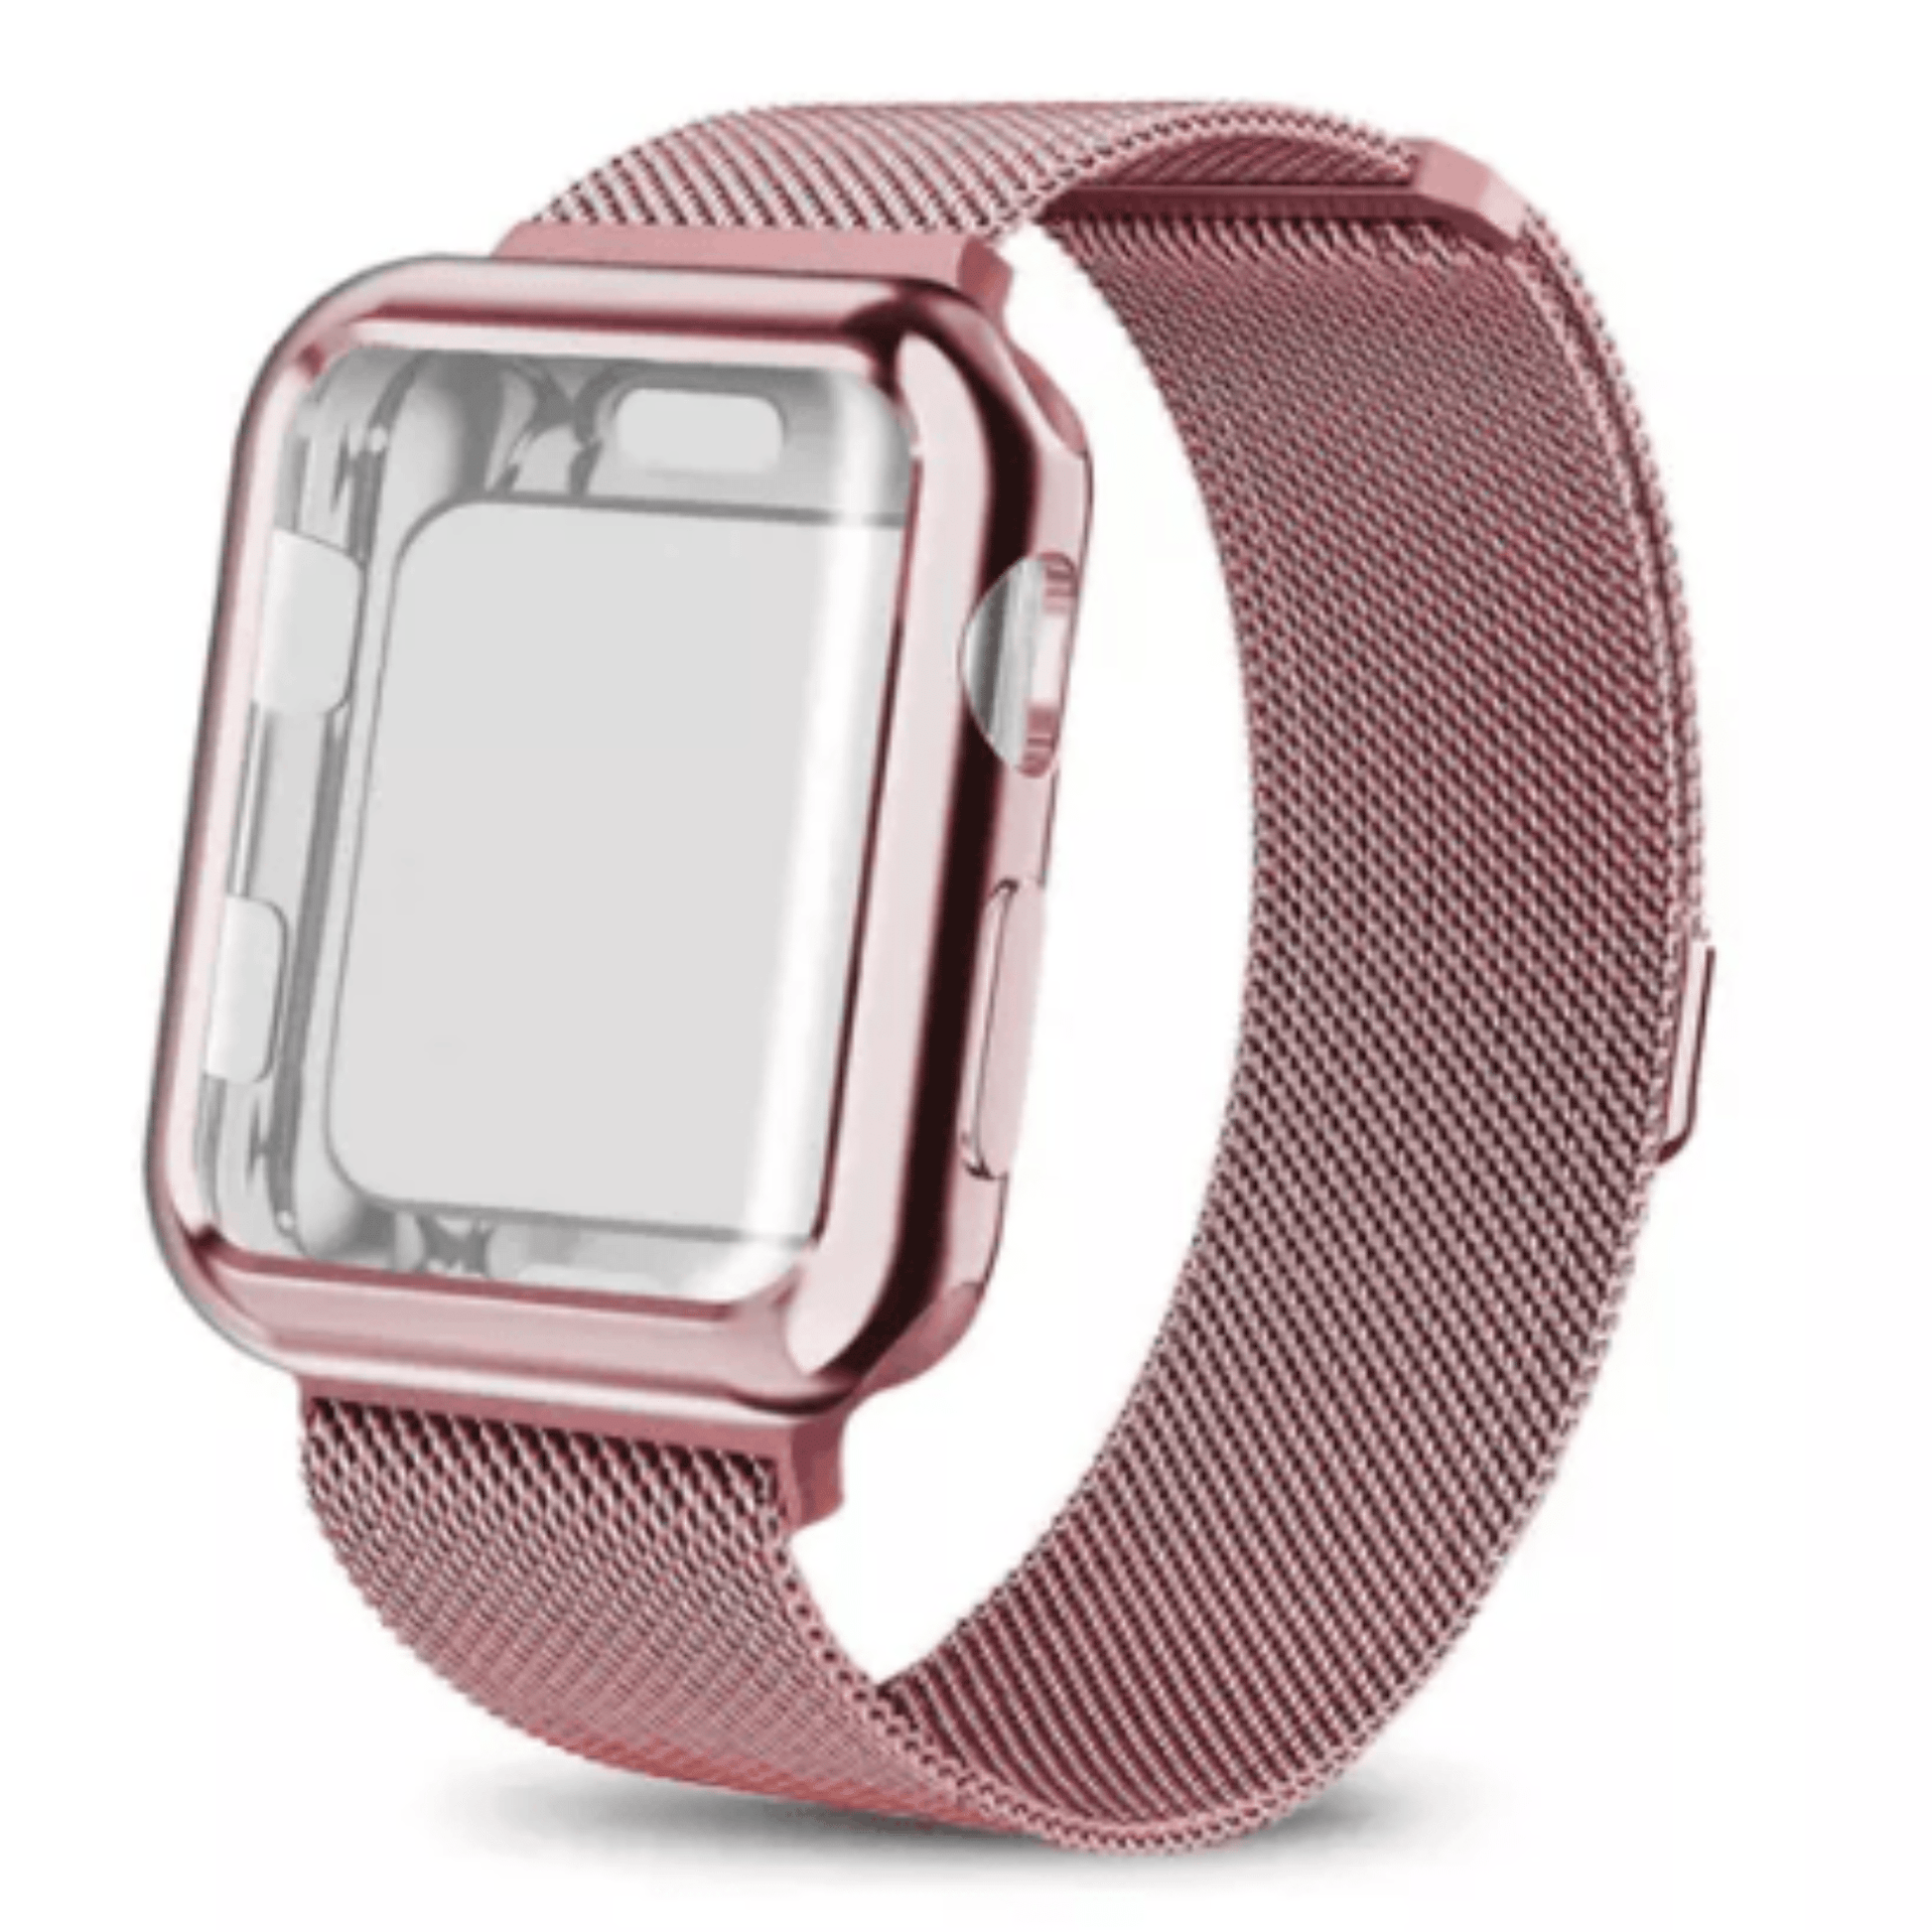 Mesh Milanese Wrist Band Loop W/ Screen Protector Bumper Case For Apple Watch Rose Gold Band & Rose Gold Case Watch Band and Cover Combo Watch Bands Elements Watches